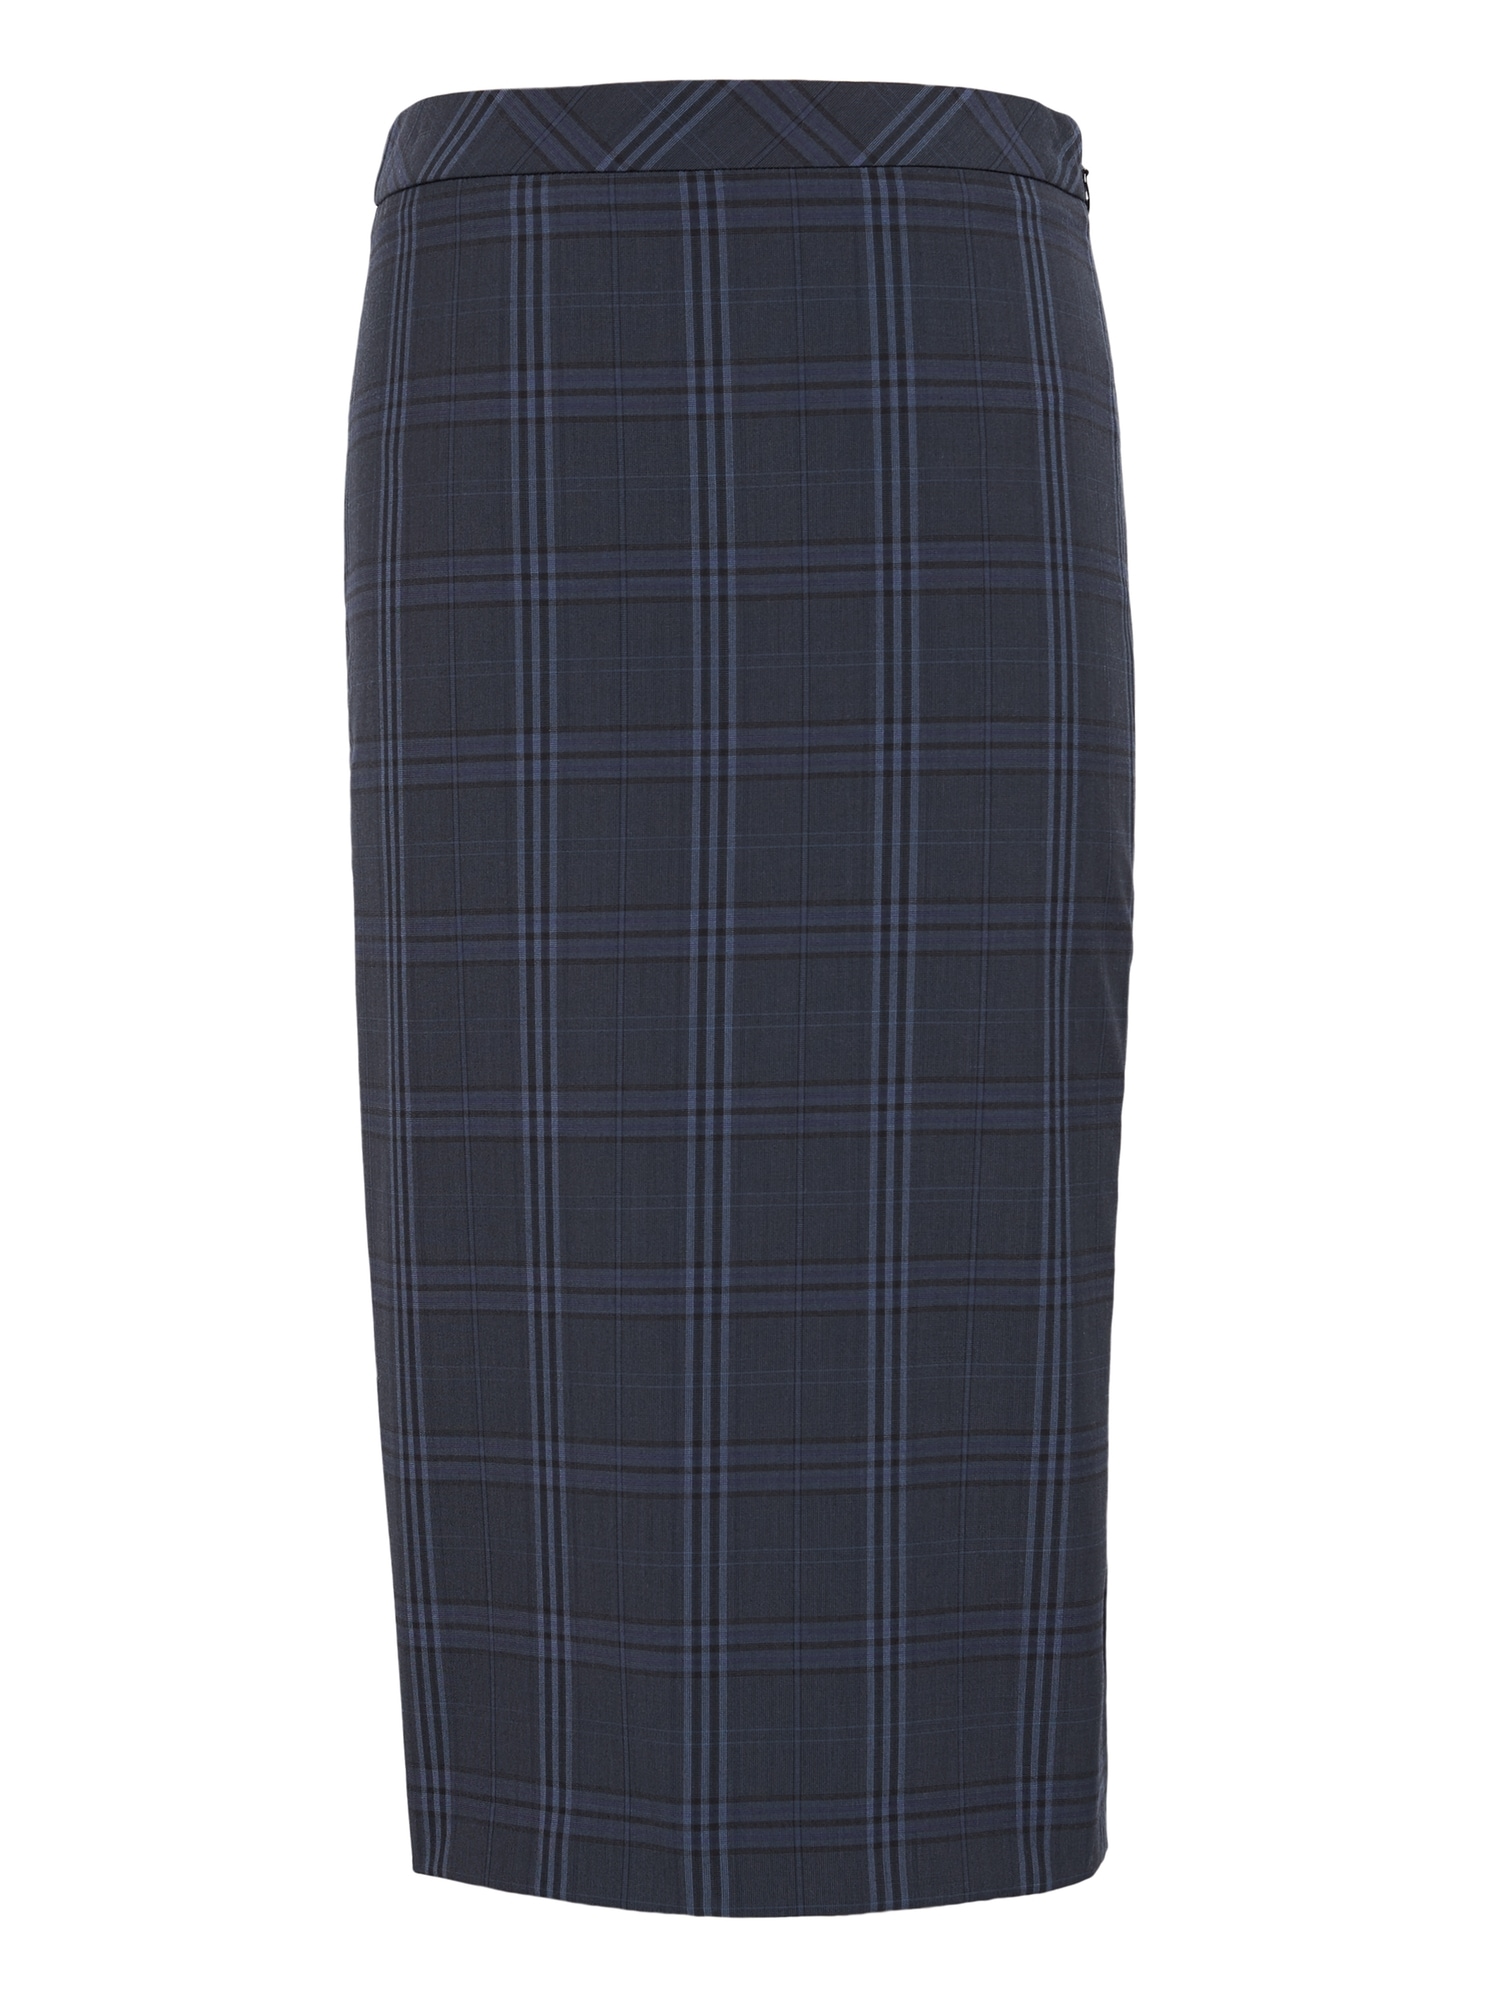 Washable Italian Wool-Blend Pencil Skirt with Side Slit